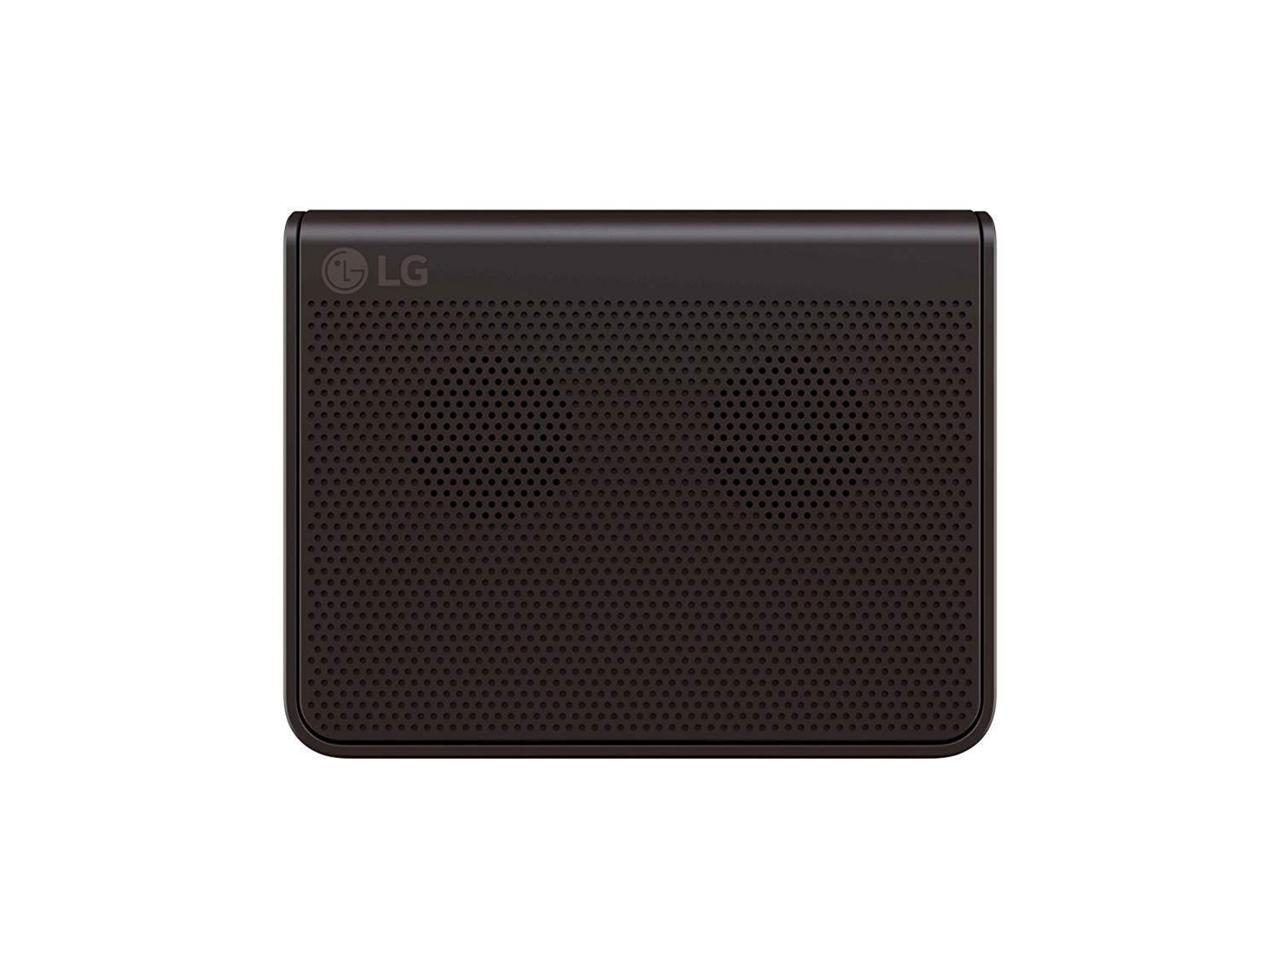 LG G Pad Plus Pack - Portable Stereonspeaker with Expandable Built-in Battery